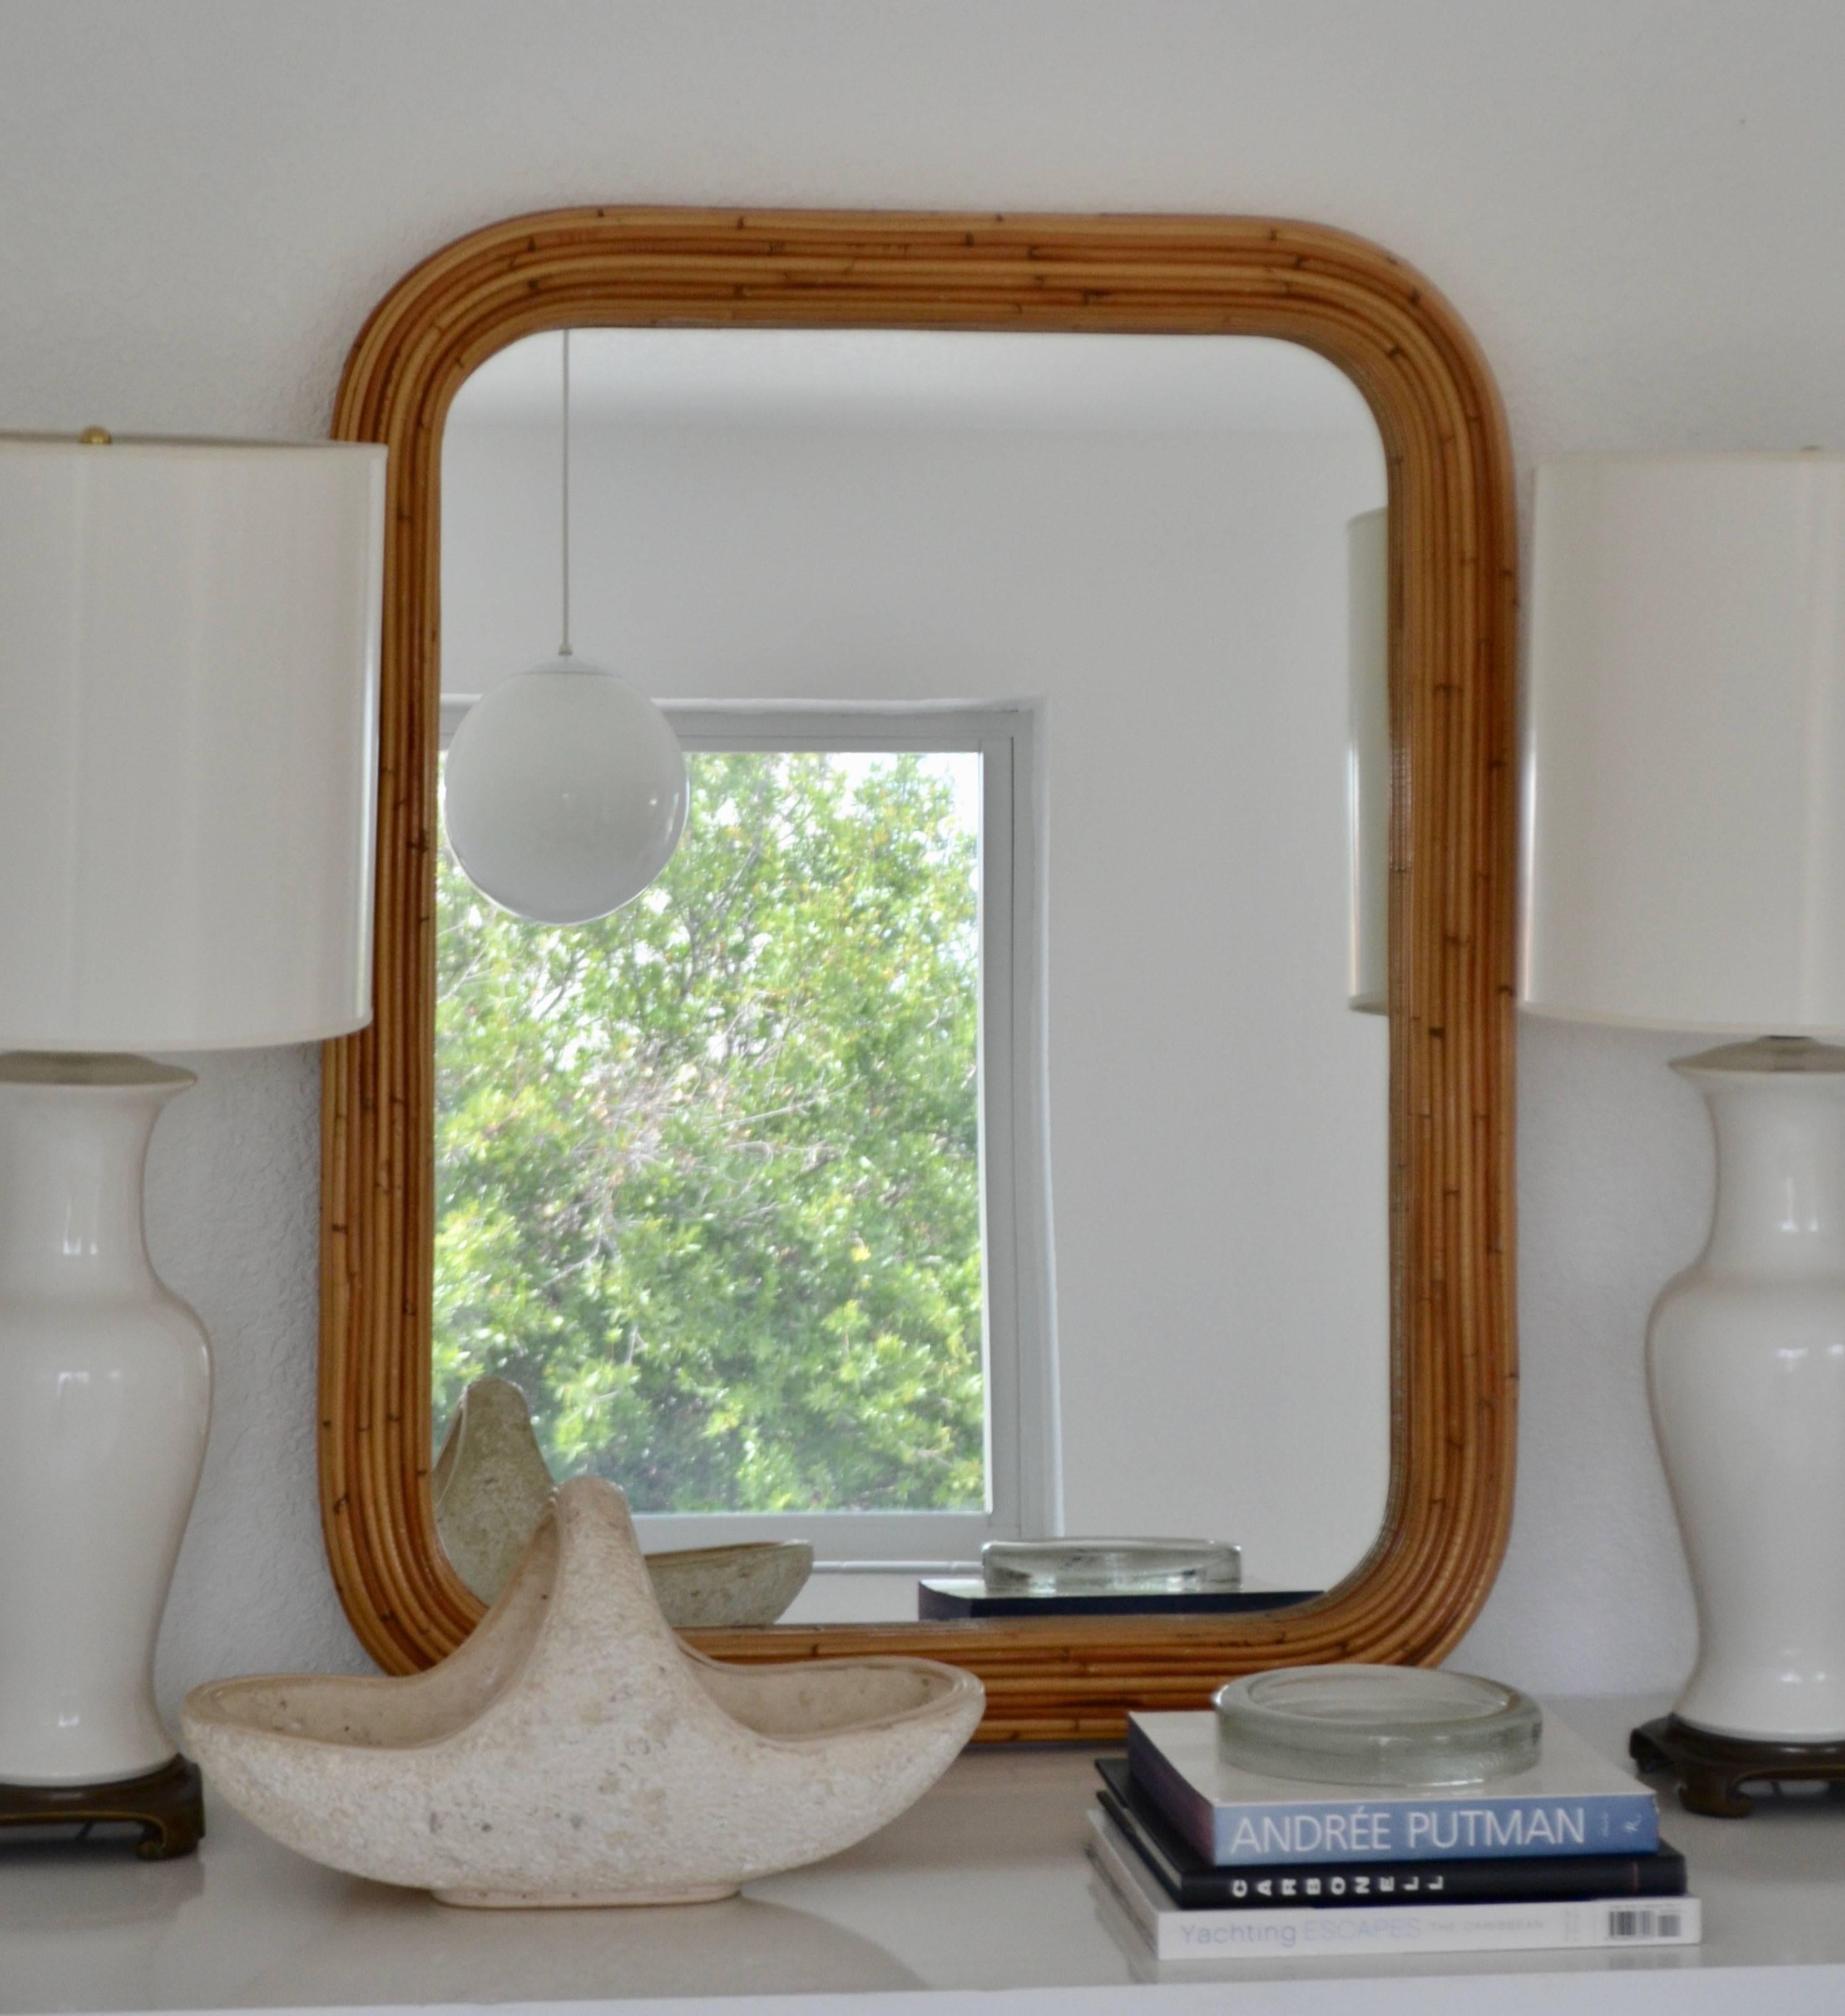 Glamorous midcentury reeded bamboo rectangular form mirror with rounded corners, circa 1960s-1970s. This impactful sculptural mirror measures 43